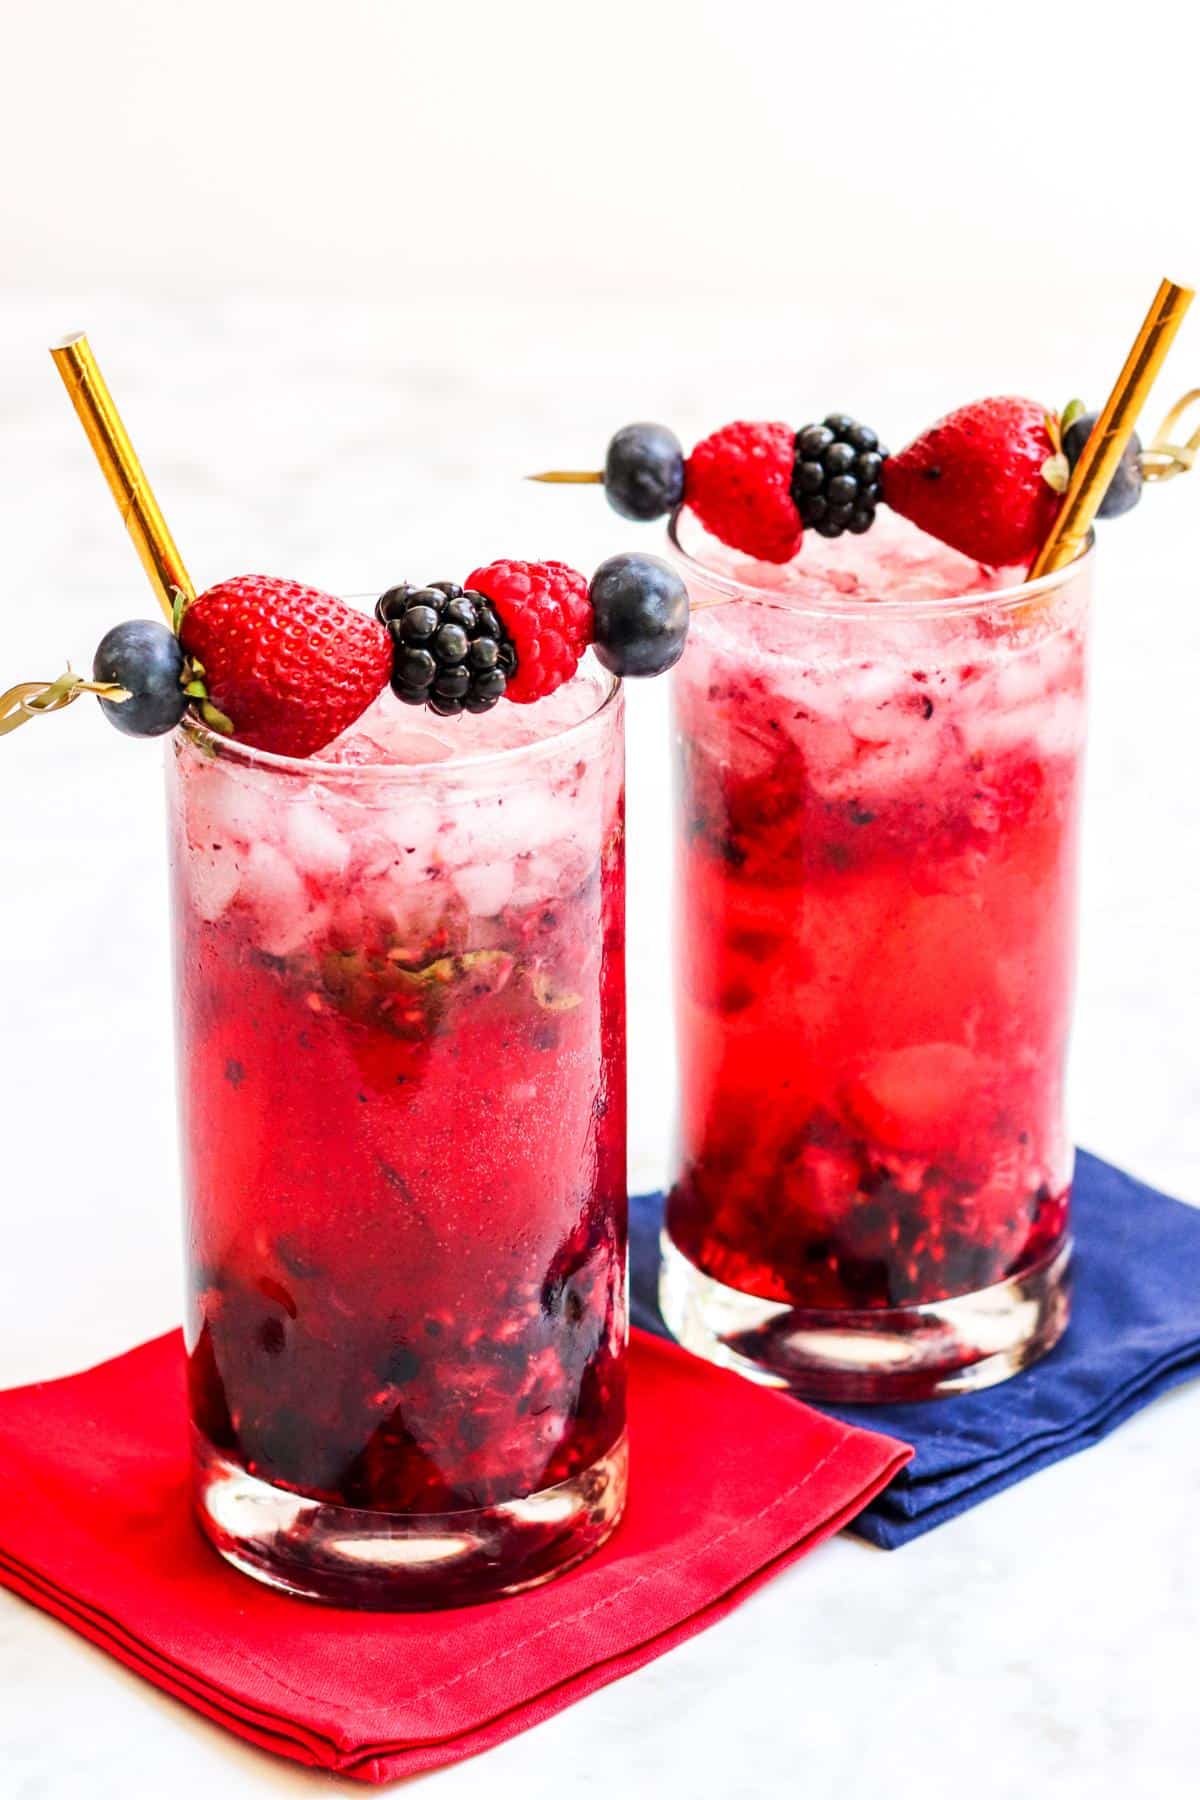 Two cocktails with gold straws and fresh berry garnishes.